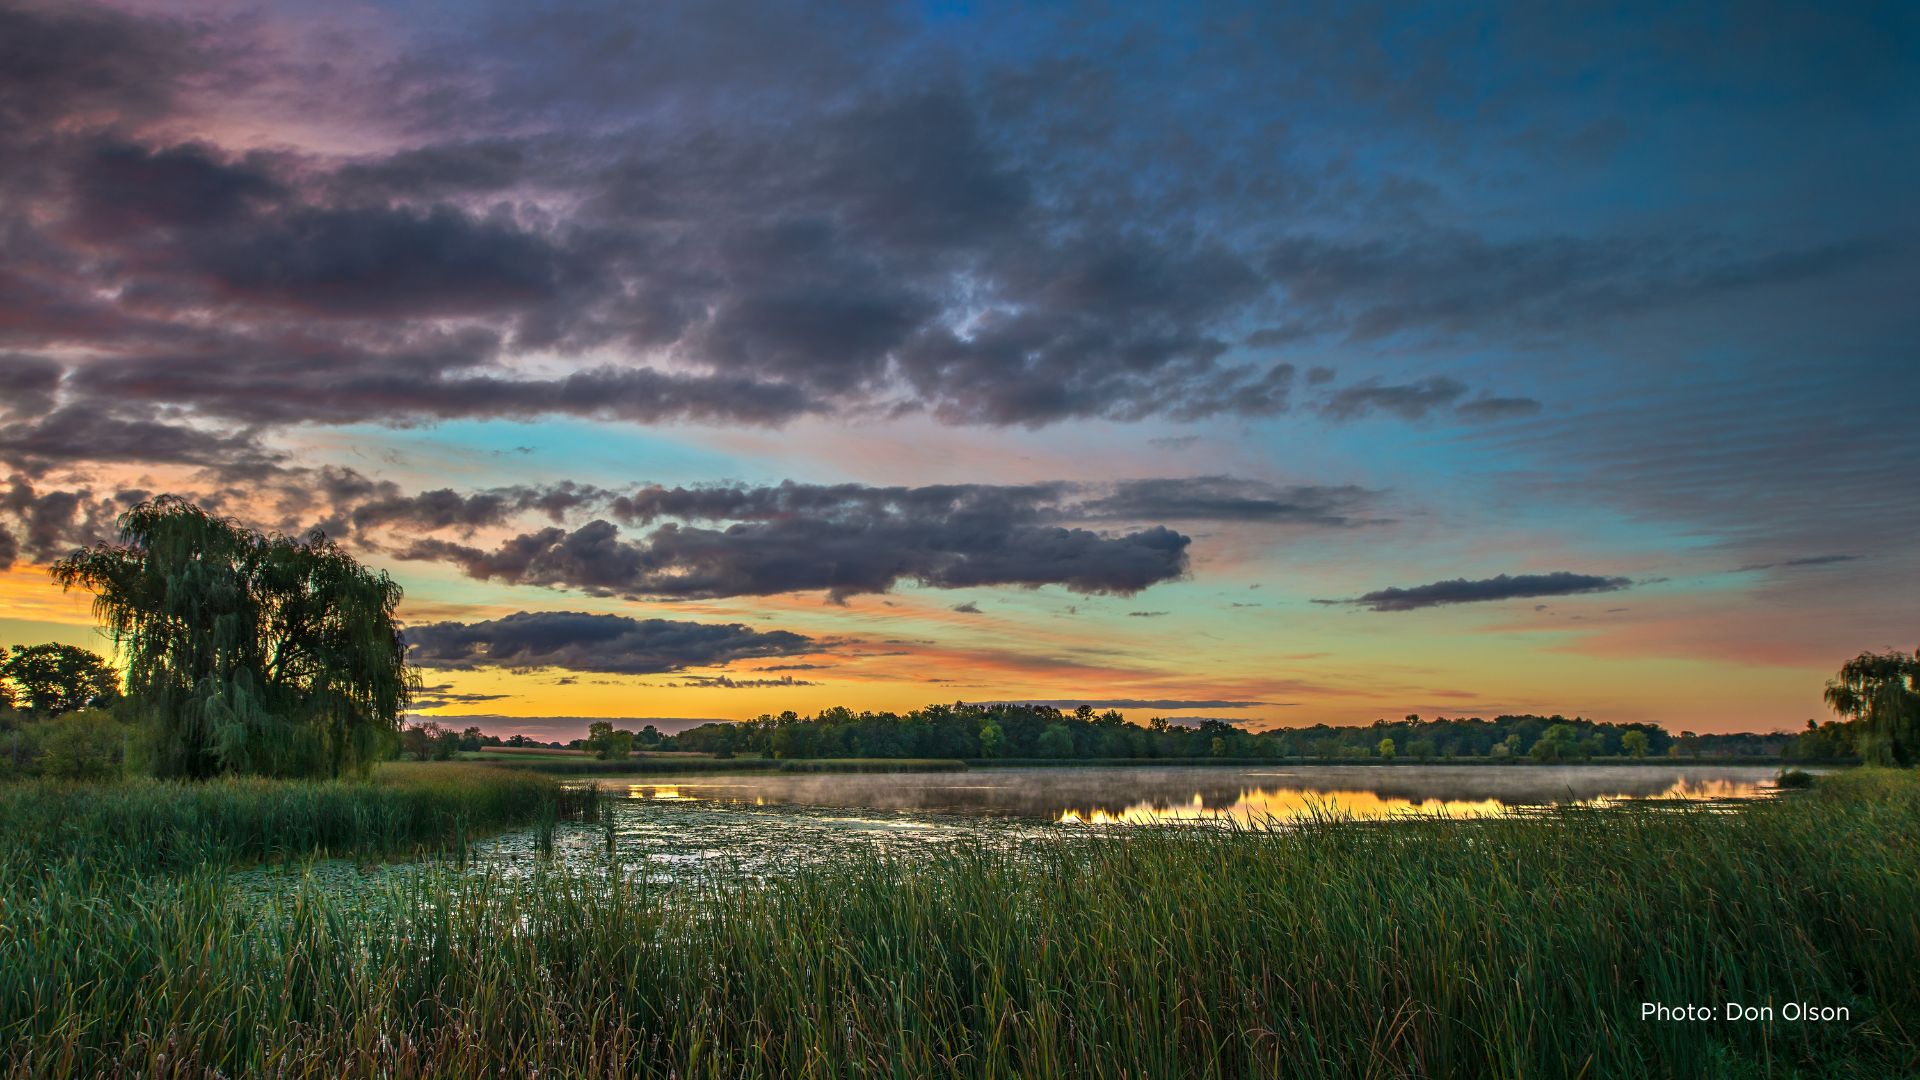 Lake with cattails and marsh grass in the foreground, willow trees and an orange, blue and purple sunset